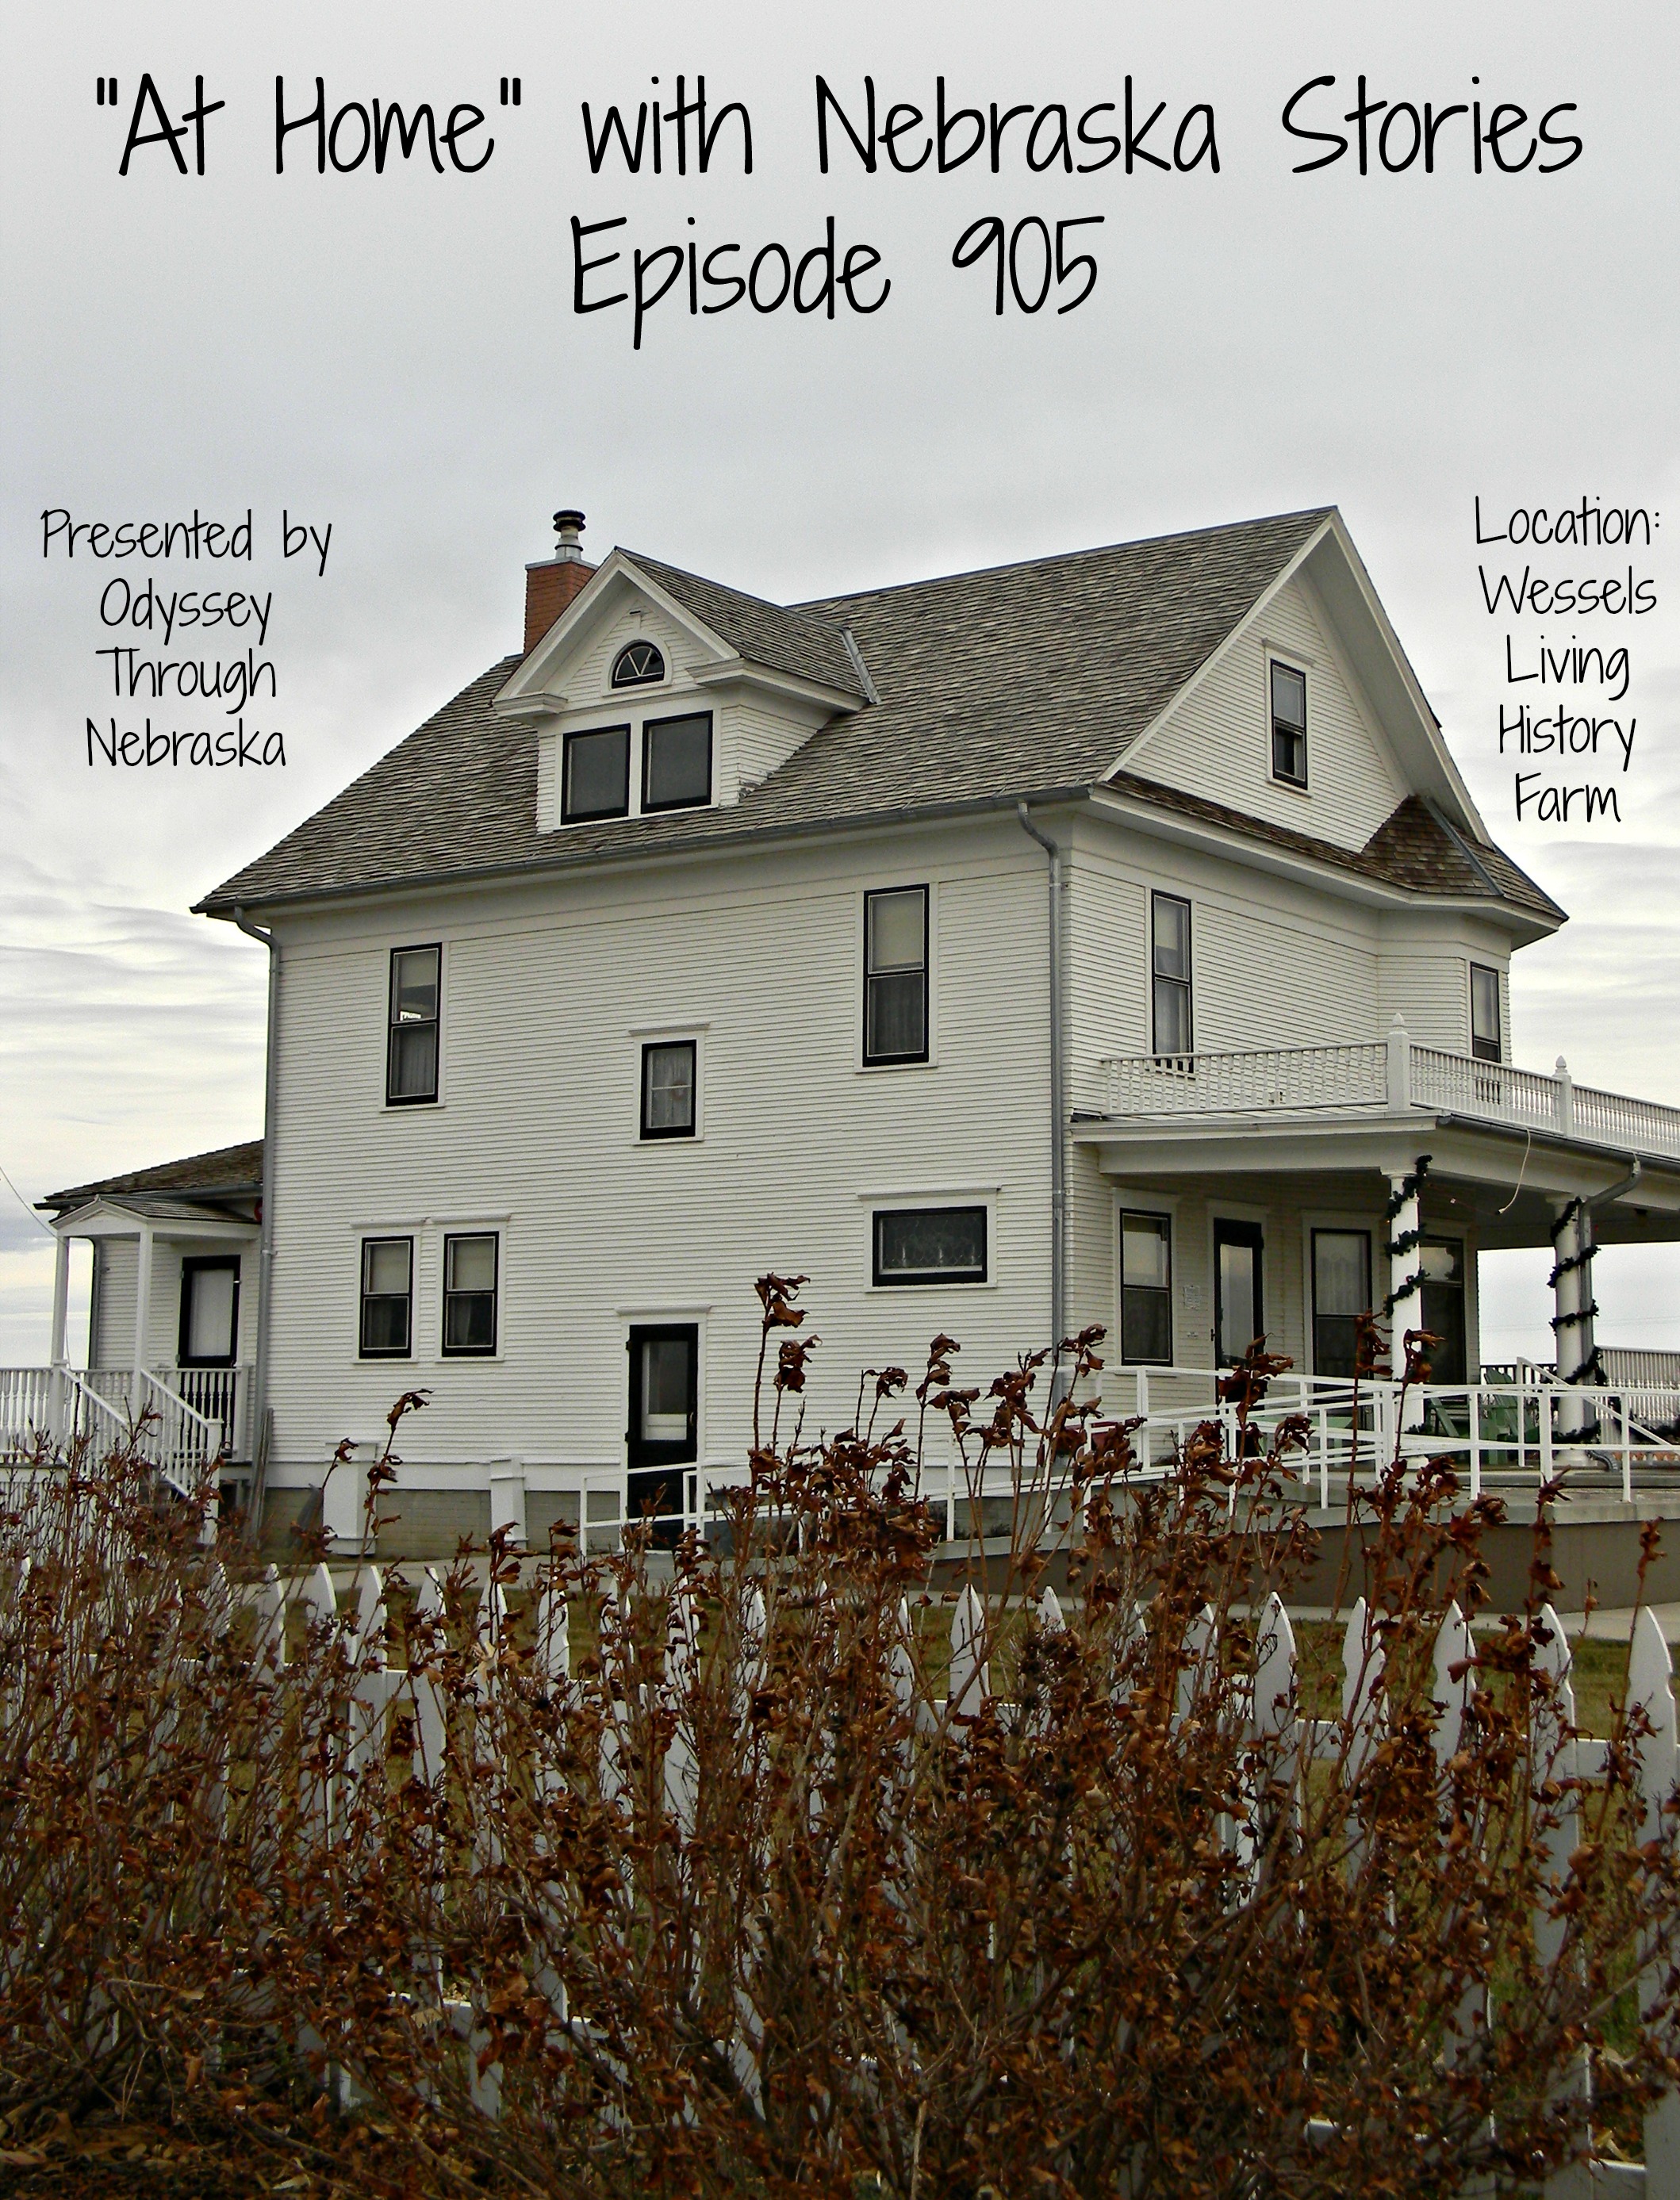 At Home with Nebraska Stories Episode 905